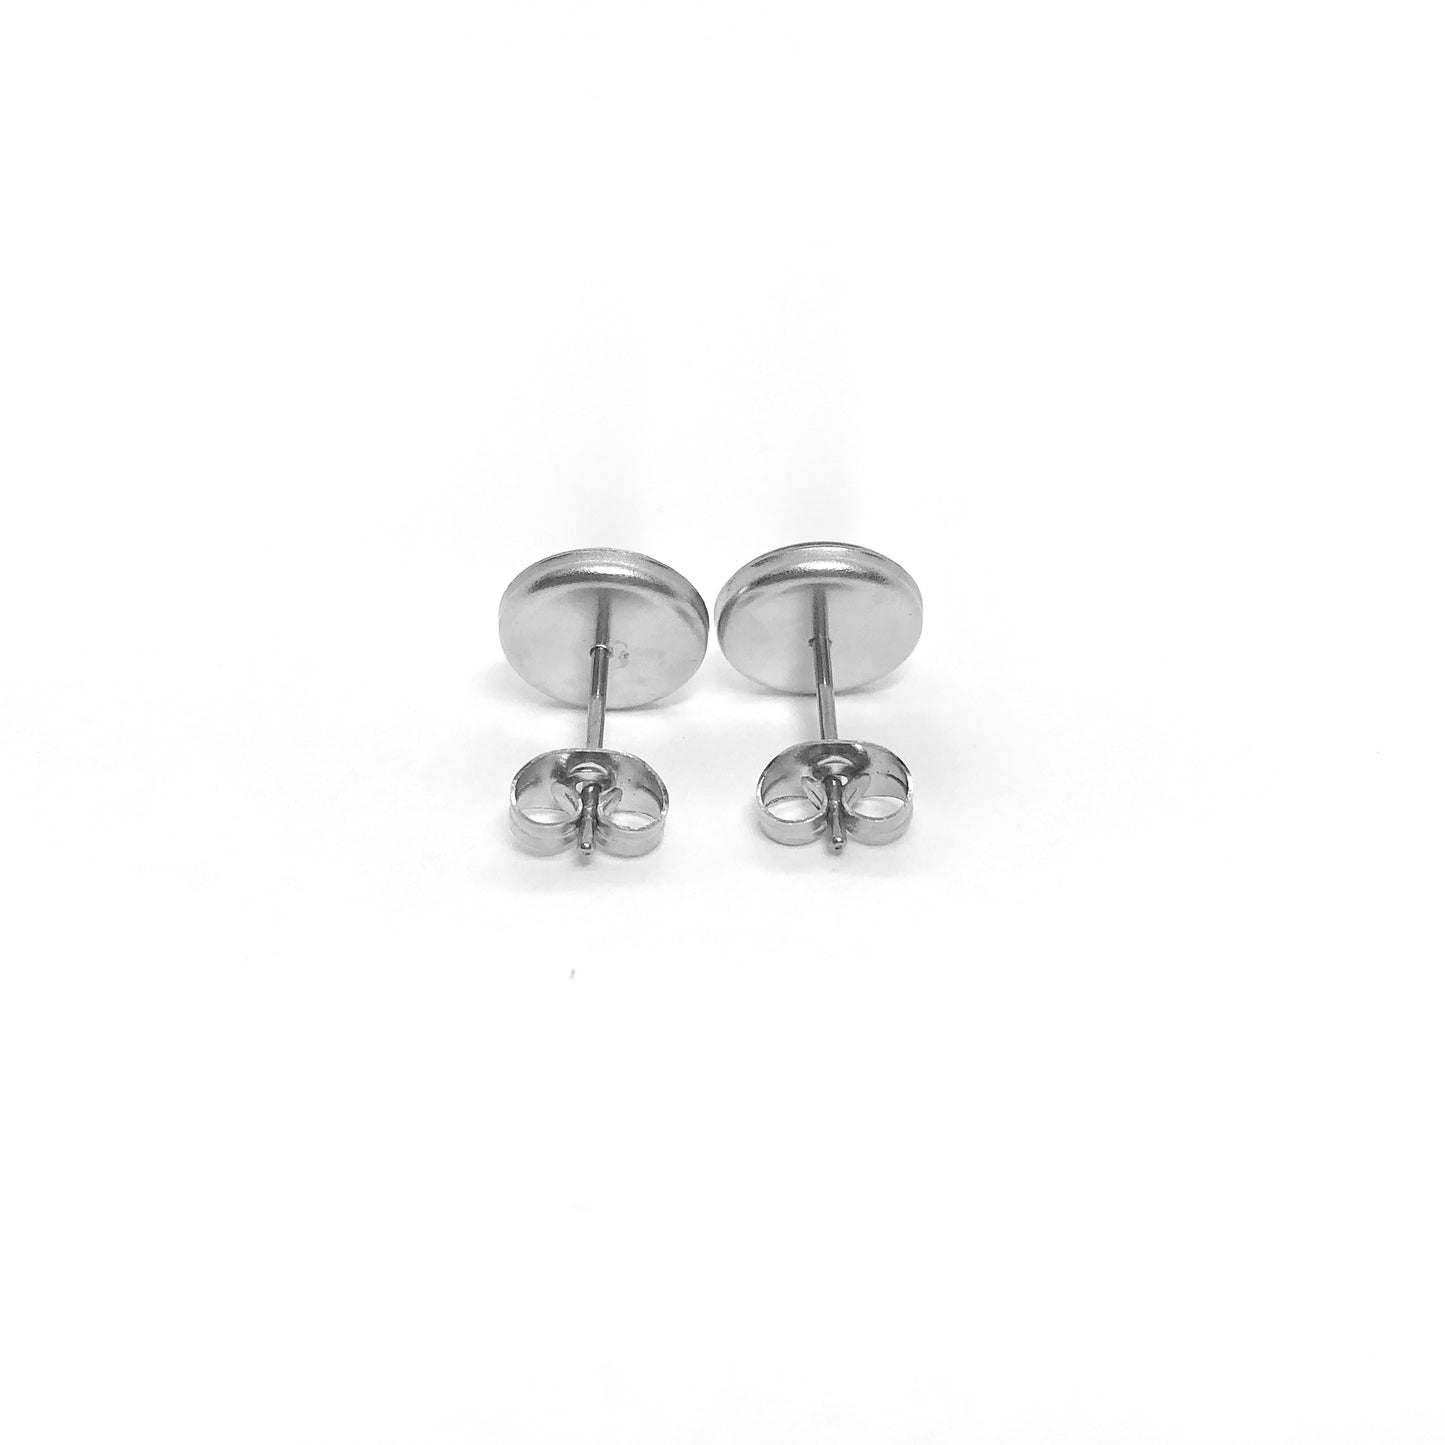 White Tribal Print Stainless Steel Studs